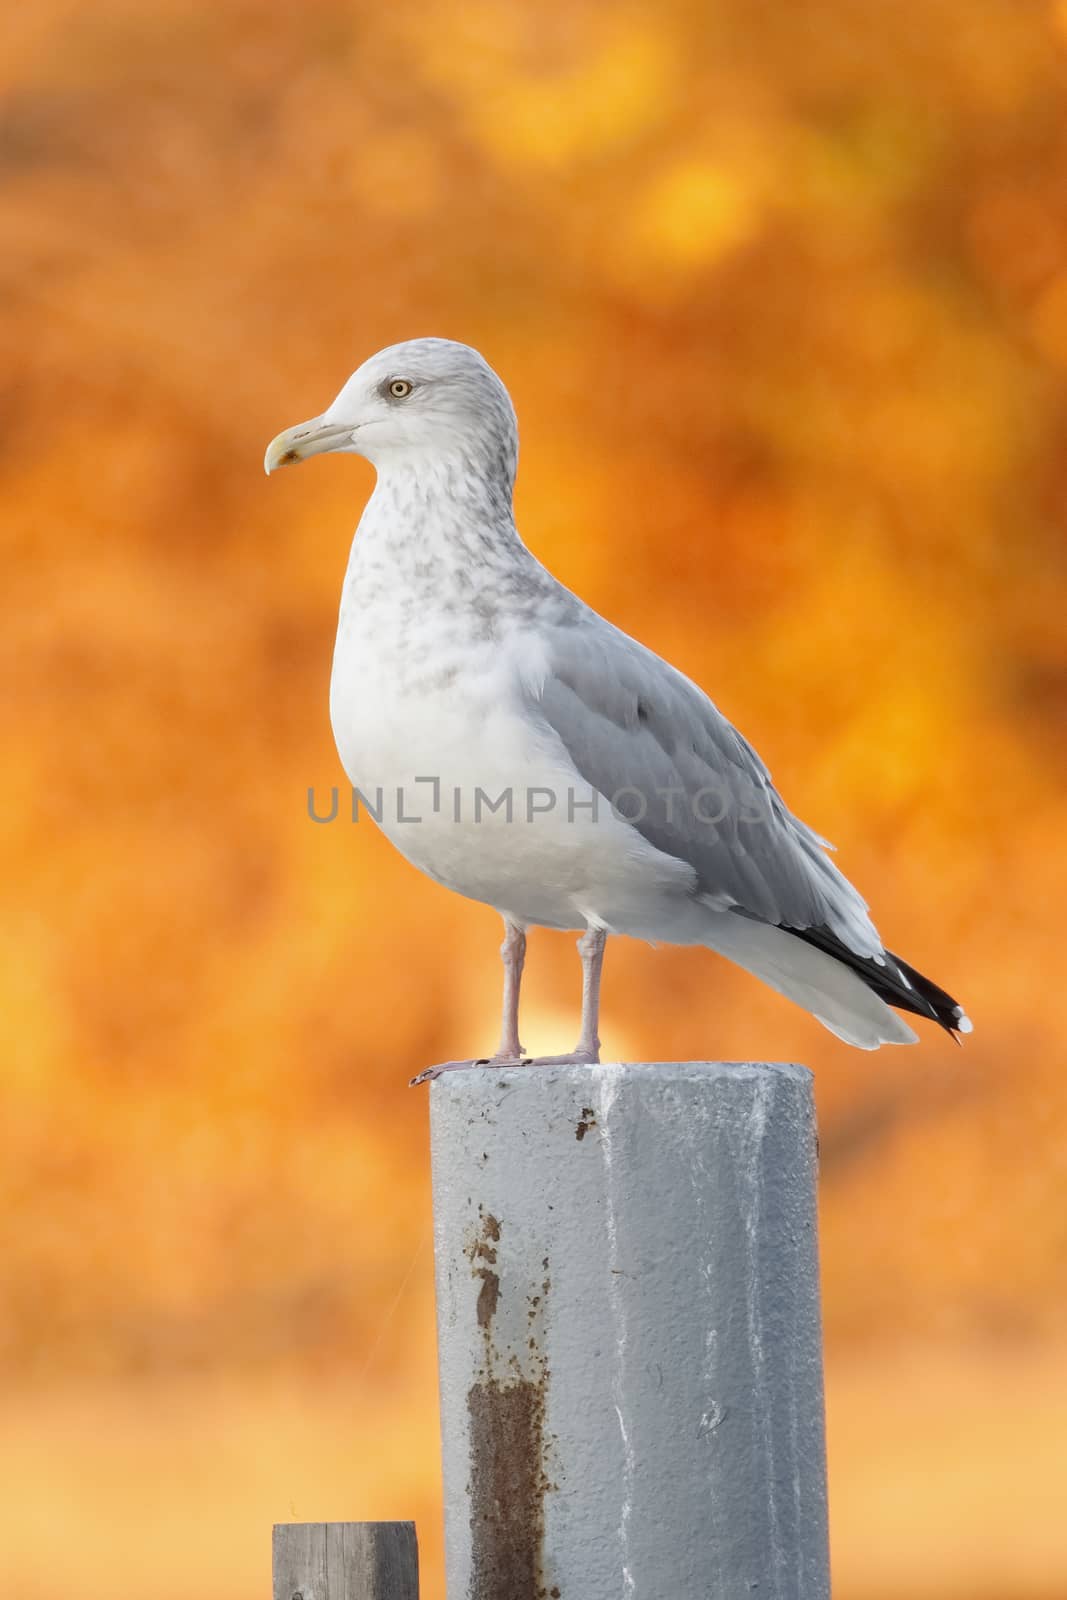 Herring Gull (Larus argentatus) in non-breeding plumage perched on a post with autumn foliage in background - Grand Bend, Ontario, Canada